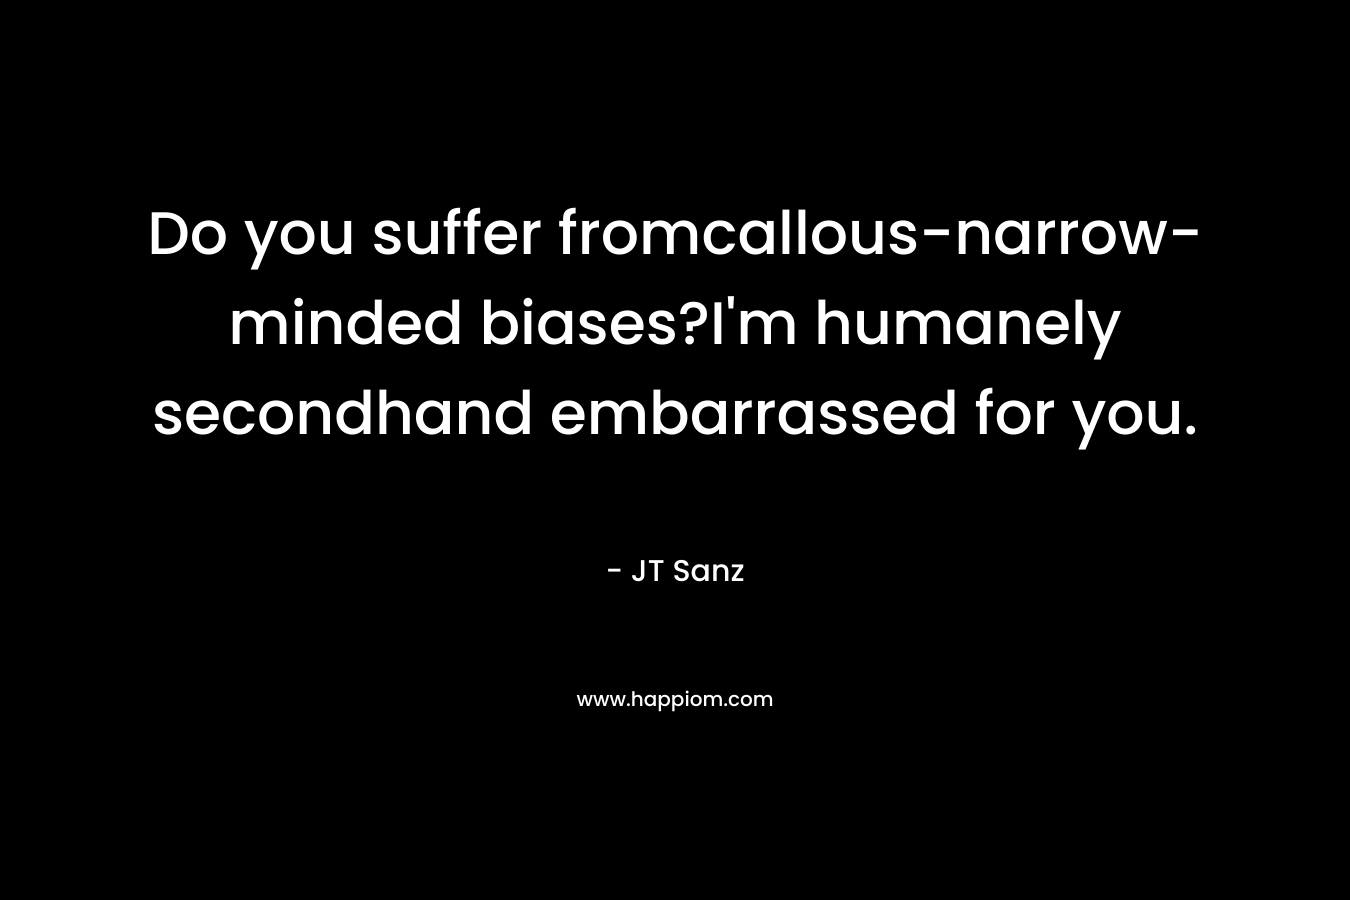 Do you suffer fromcallous-narrow-minded biases?I'm humanely secondhand embarrassed for you.